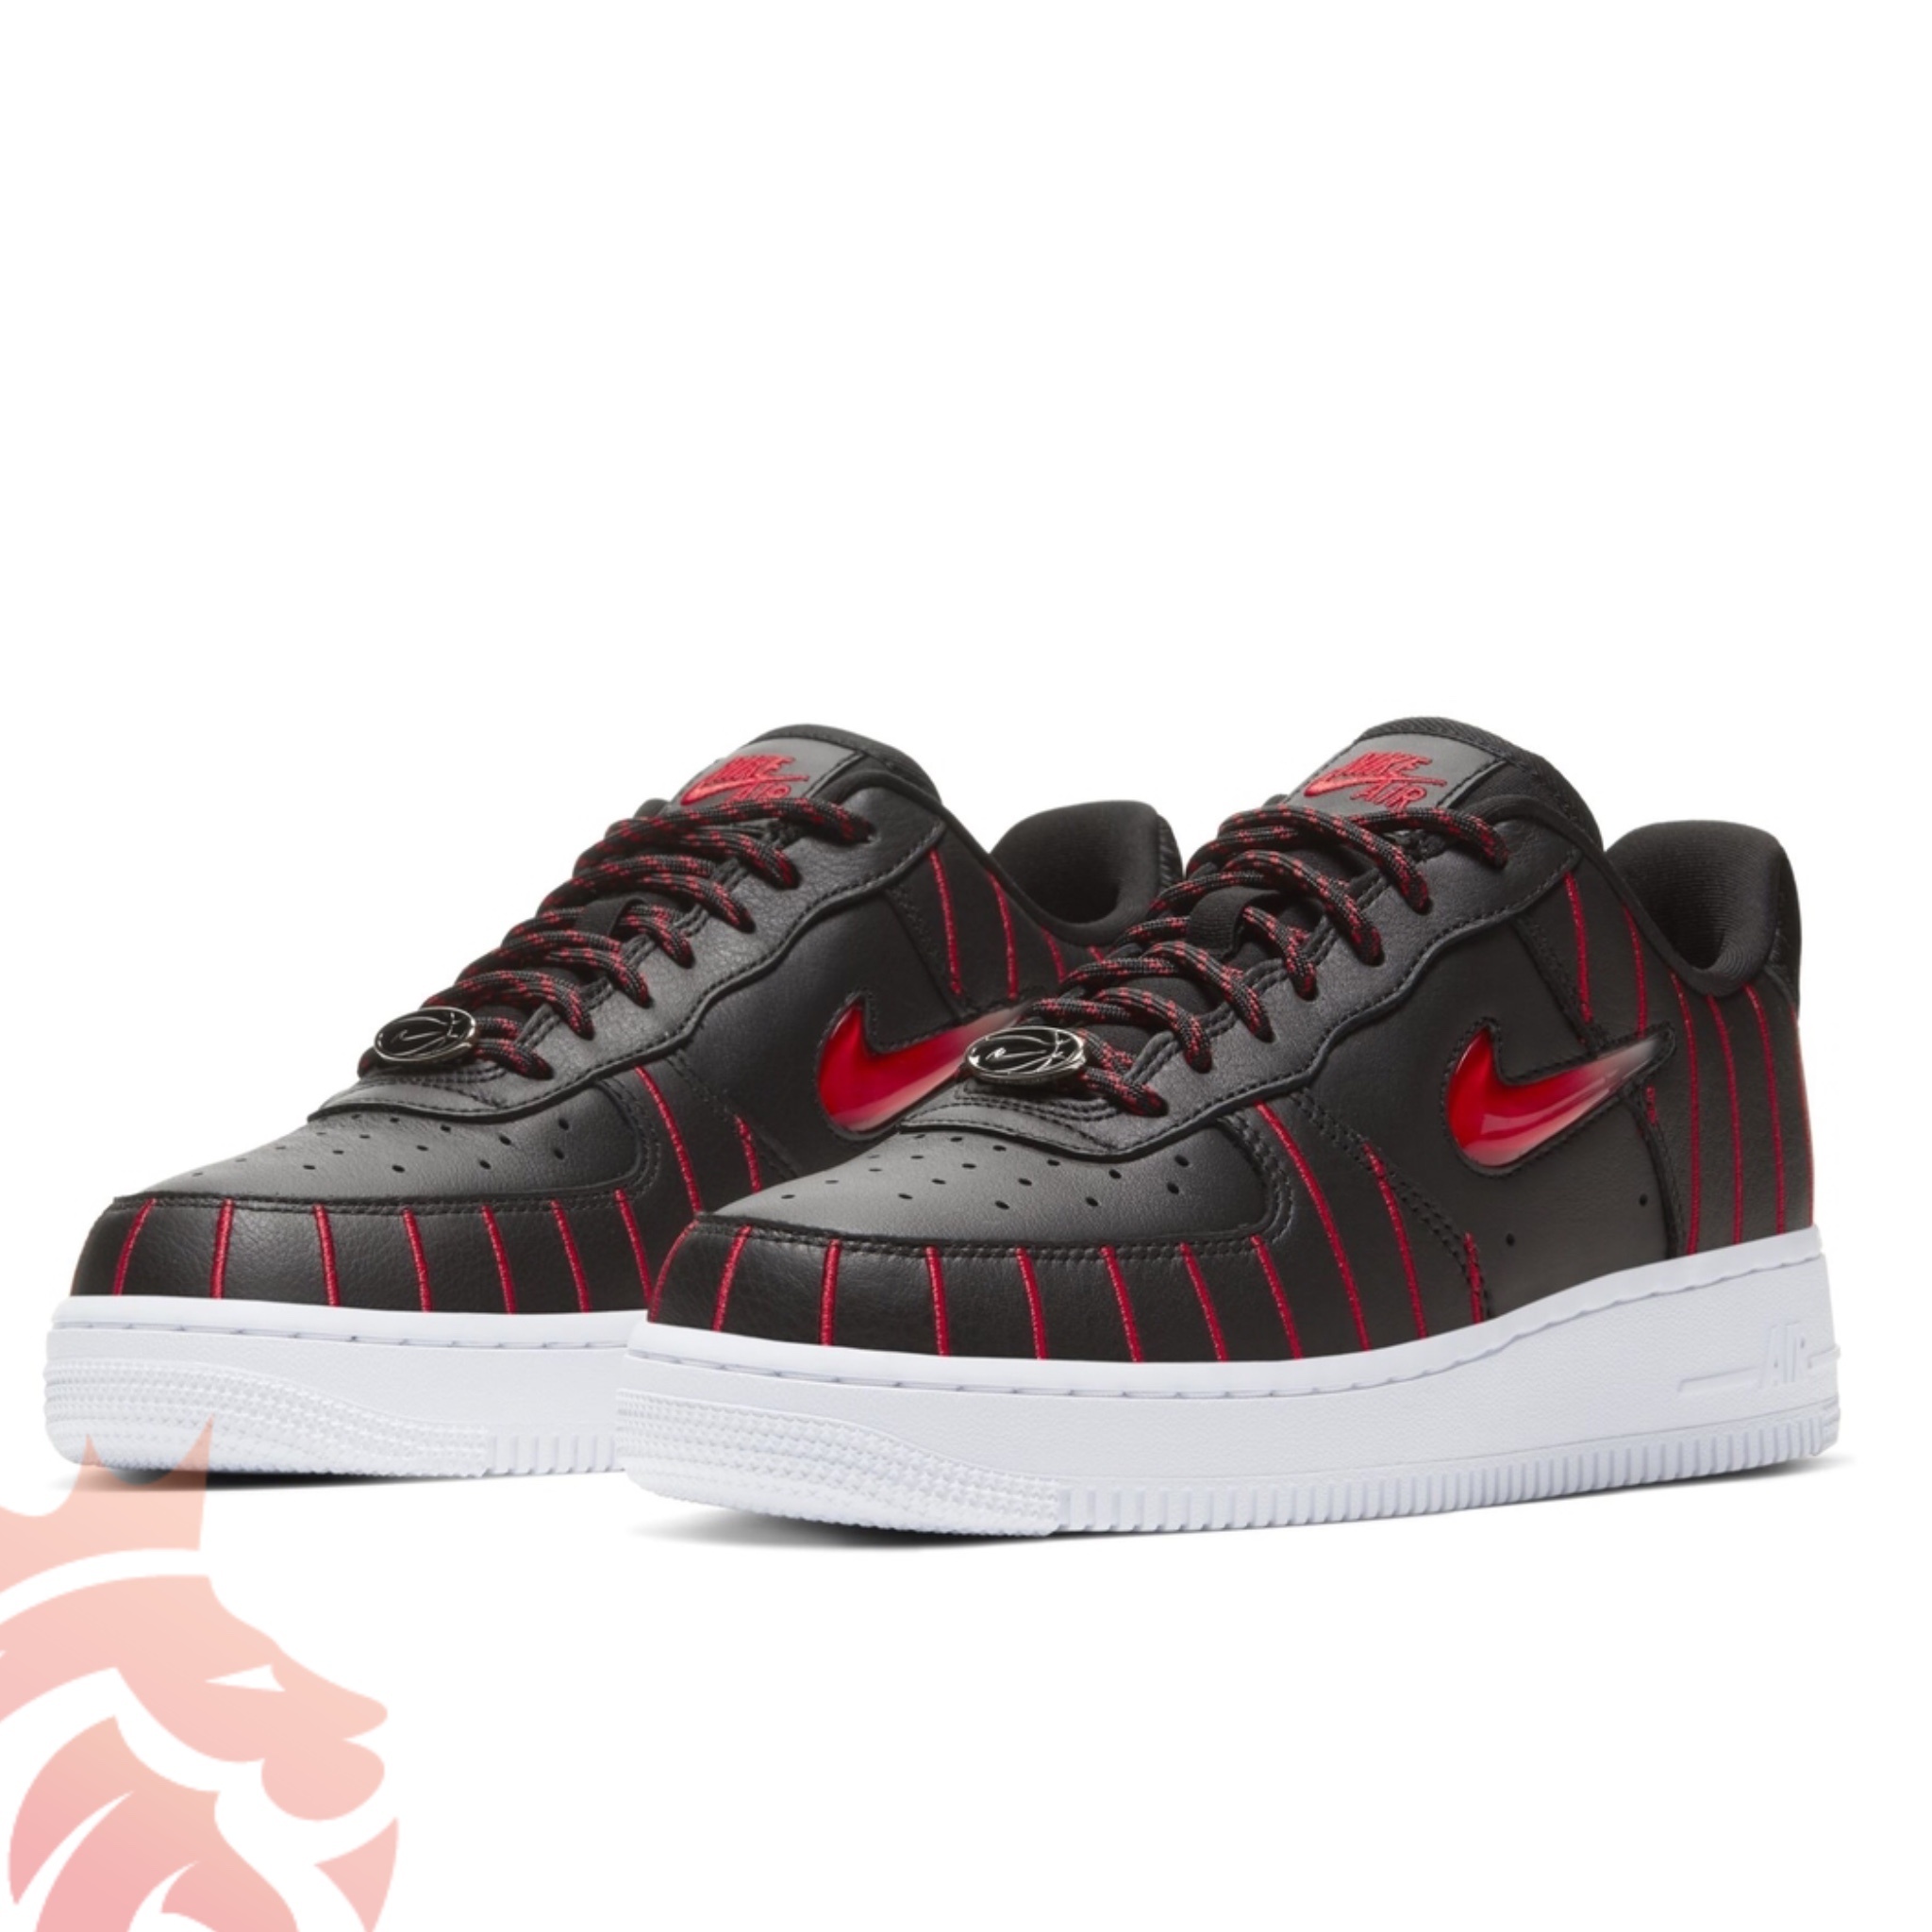 Nike WMNS Exclusive Air Force 1 Low Jewel QS "Chicago"